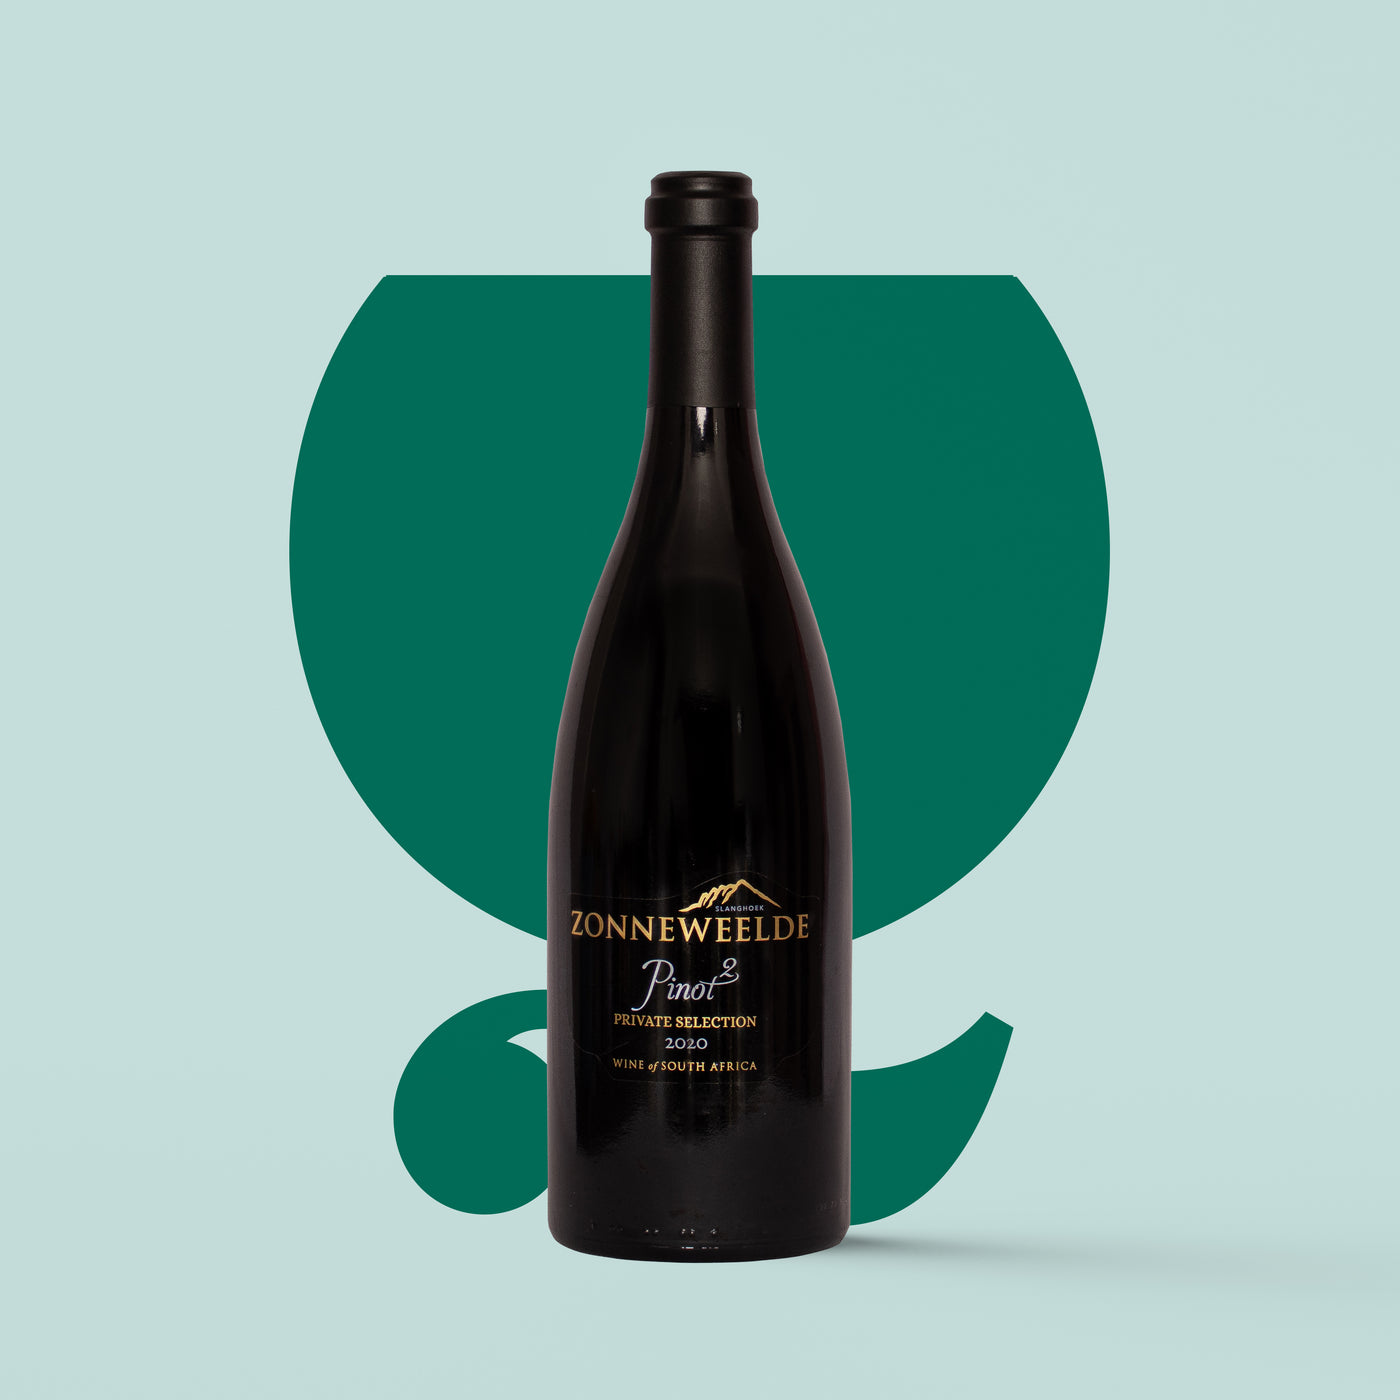 QBottle #15: Zonneweelde Pinot2 - Limited production Pinot Noir - Pinotage